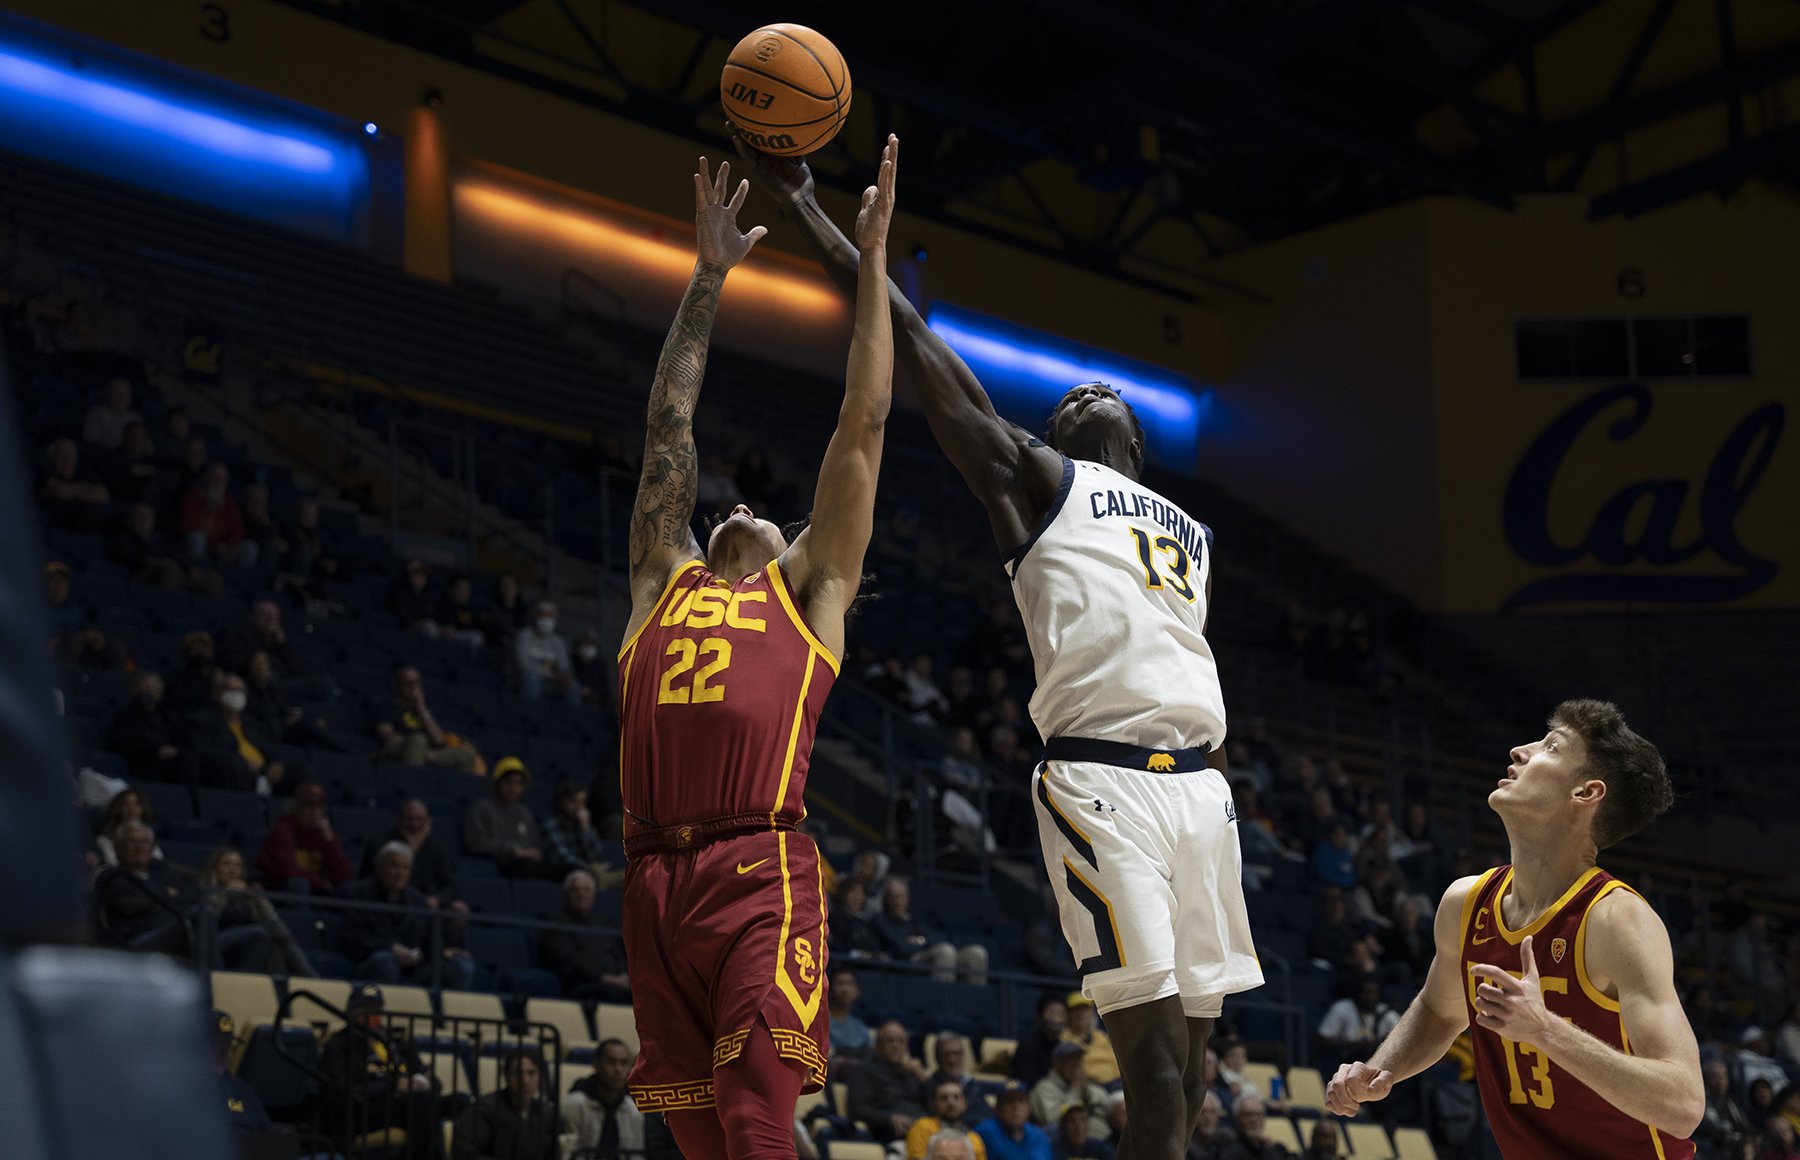 Lid on the rim: Cal’s offense suffers in loss to USC